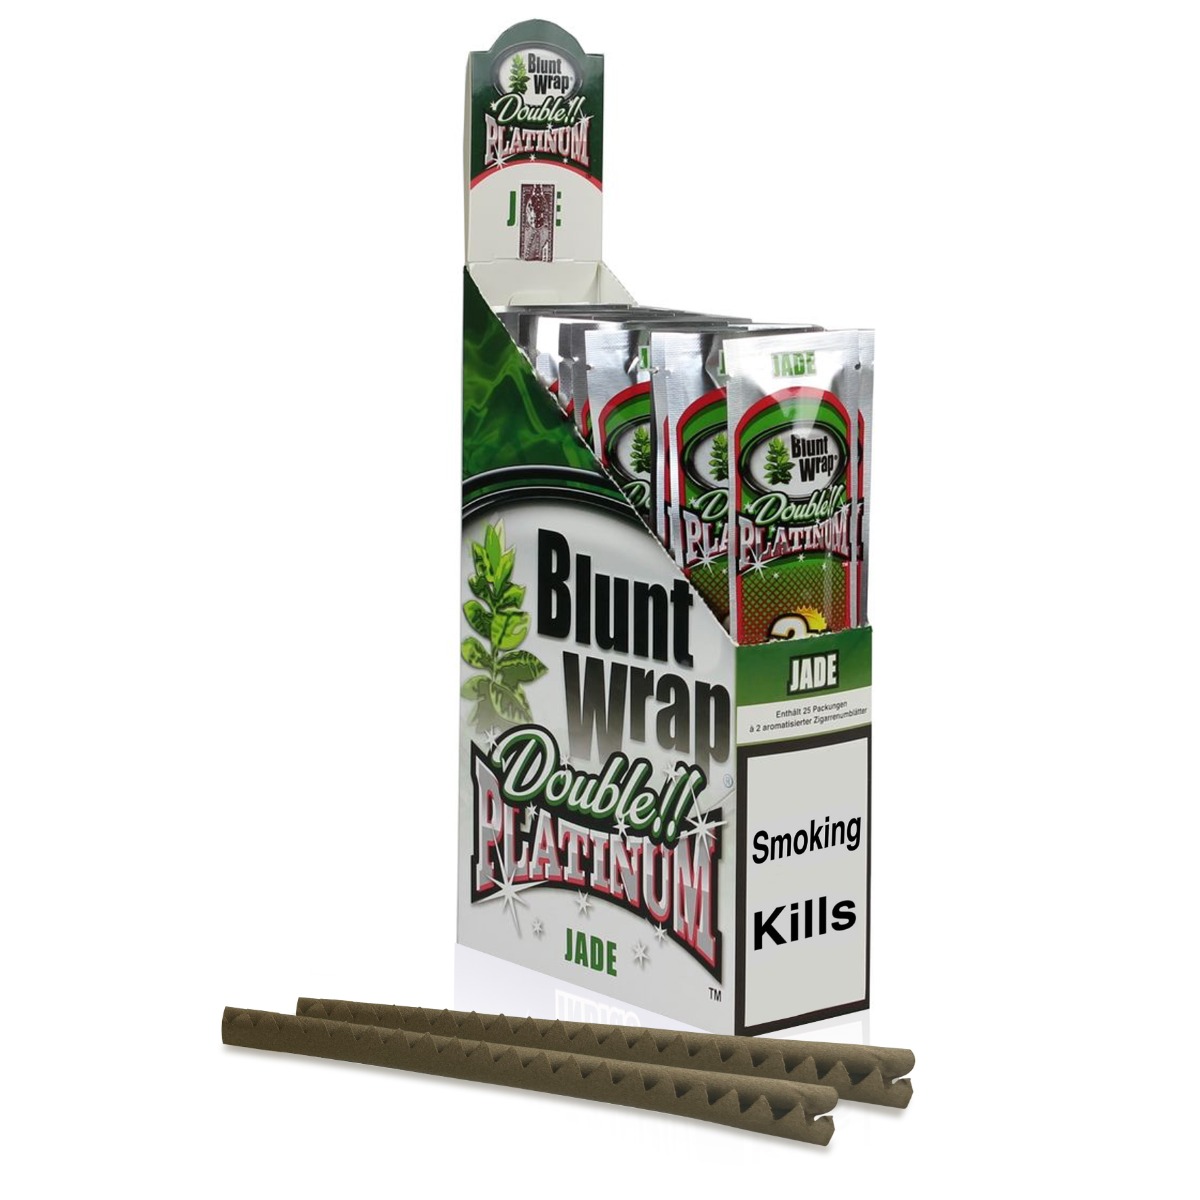 Blunt wrap double platinum - Jade (Previously watermelon) - pack of 2 